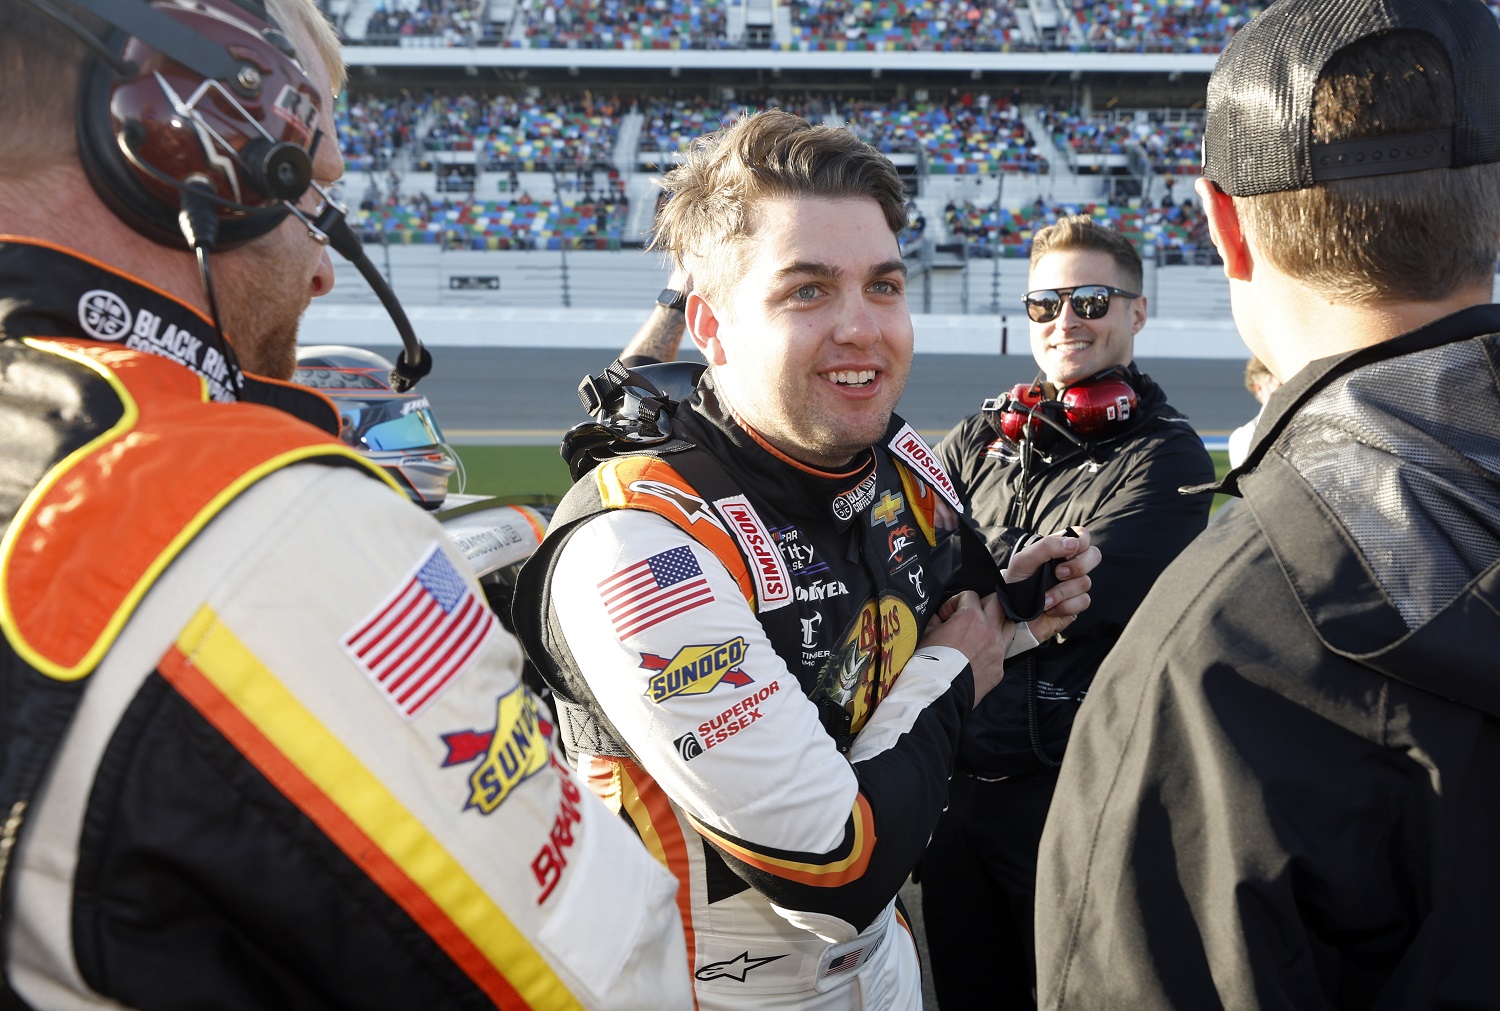 Noah Gragson, driver of the No. 9 Chevrolet, talks with crew on the grid prior to the NASCAR Xfinity Series 'Beef. It's What's For Dinner. 300' at Daytona International Speedway on Feb. 19, 2022.